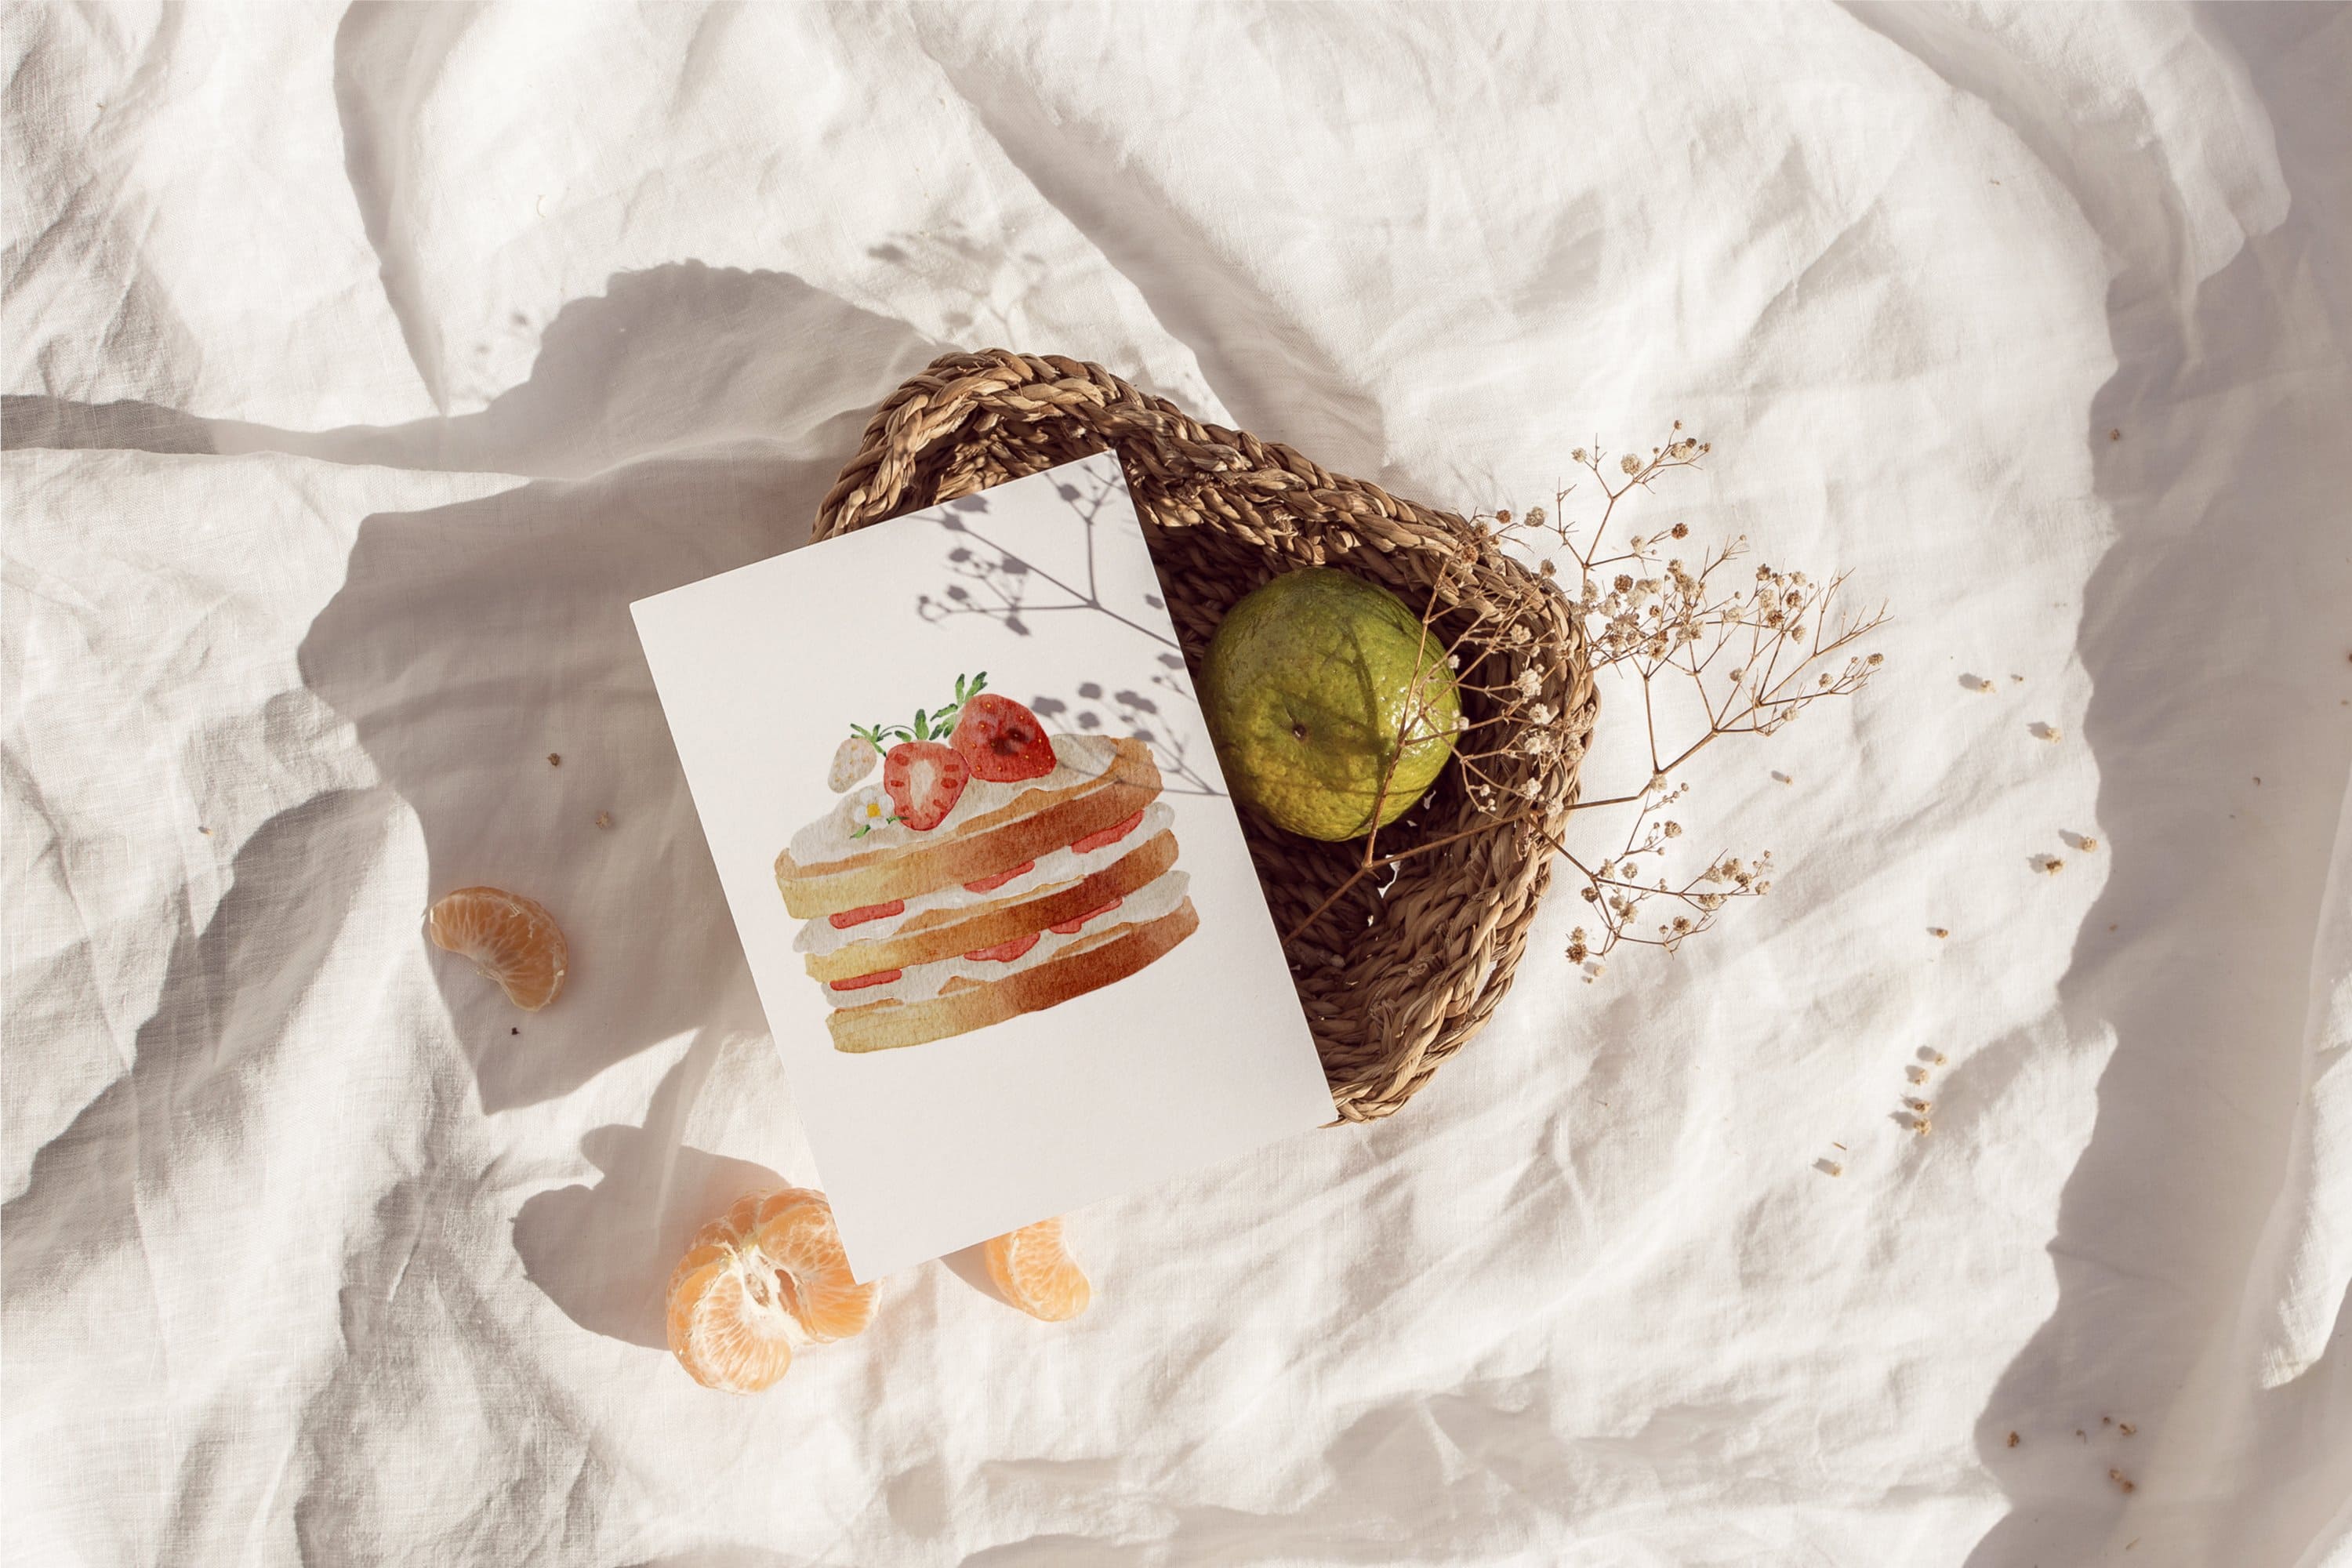 The card depicts a cake with a cake, white cream and strawberries on top.